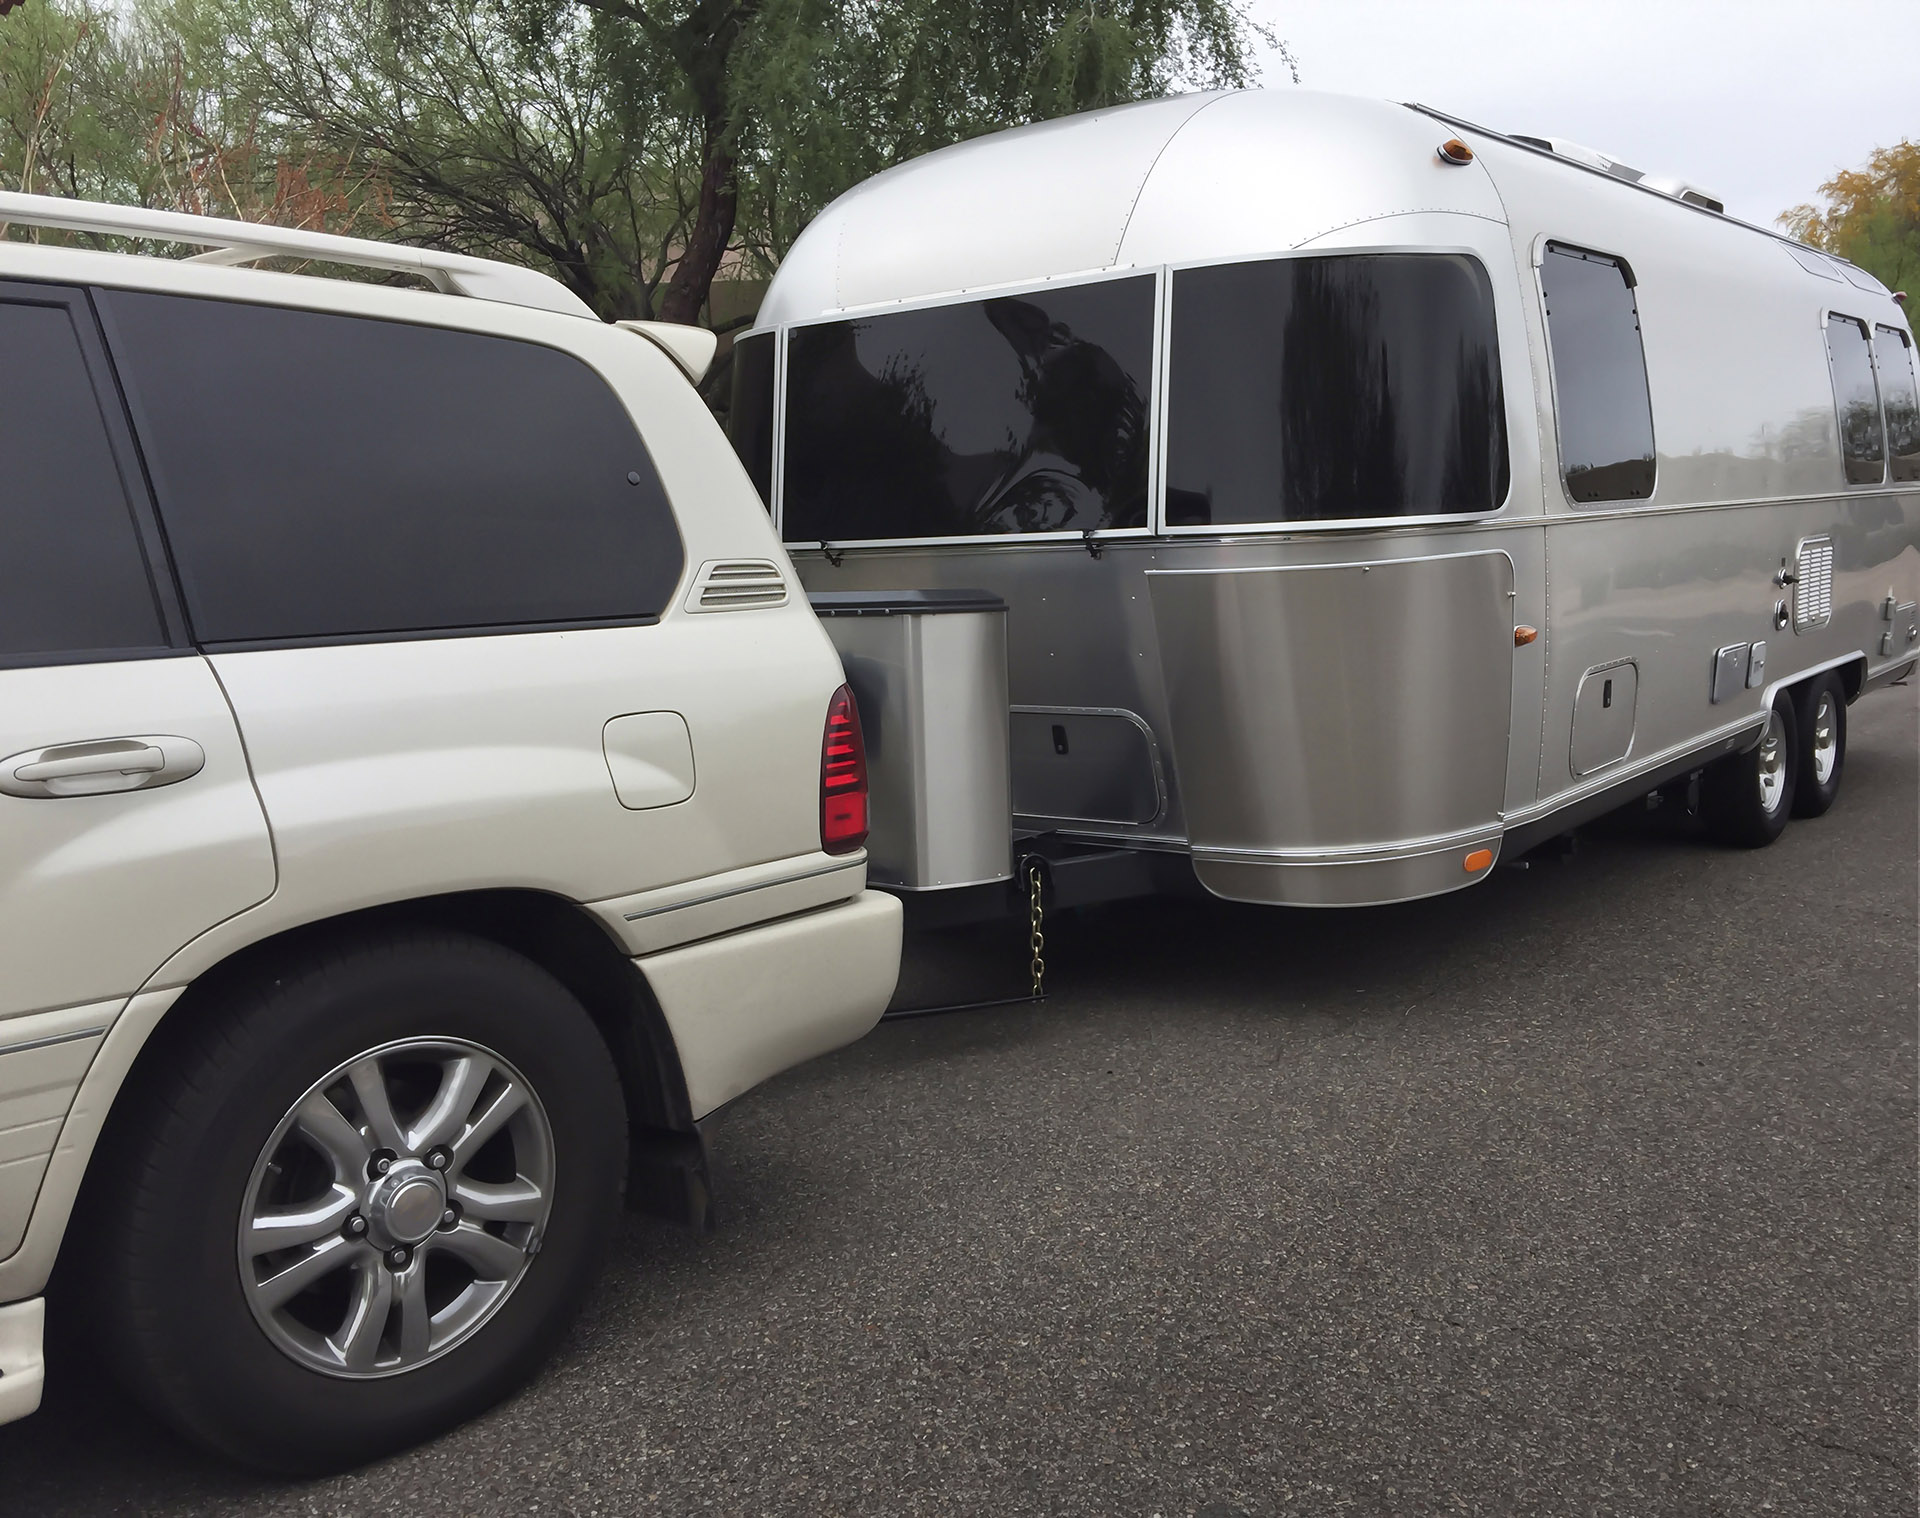 Large white SUV vehicle towing a camping trailer